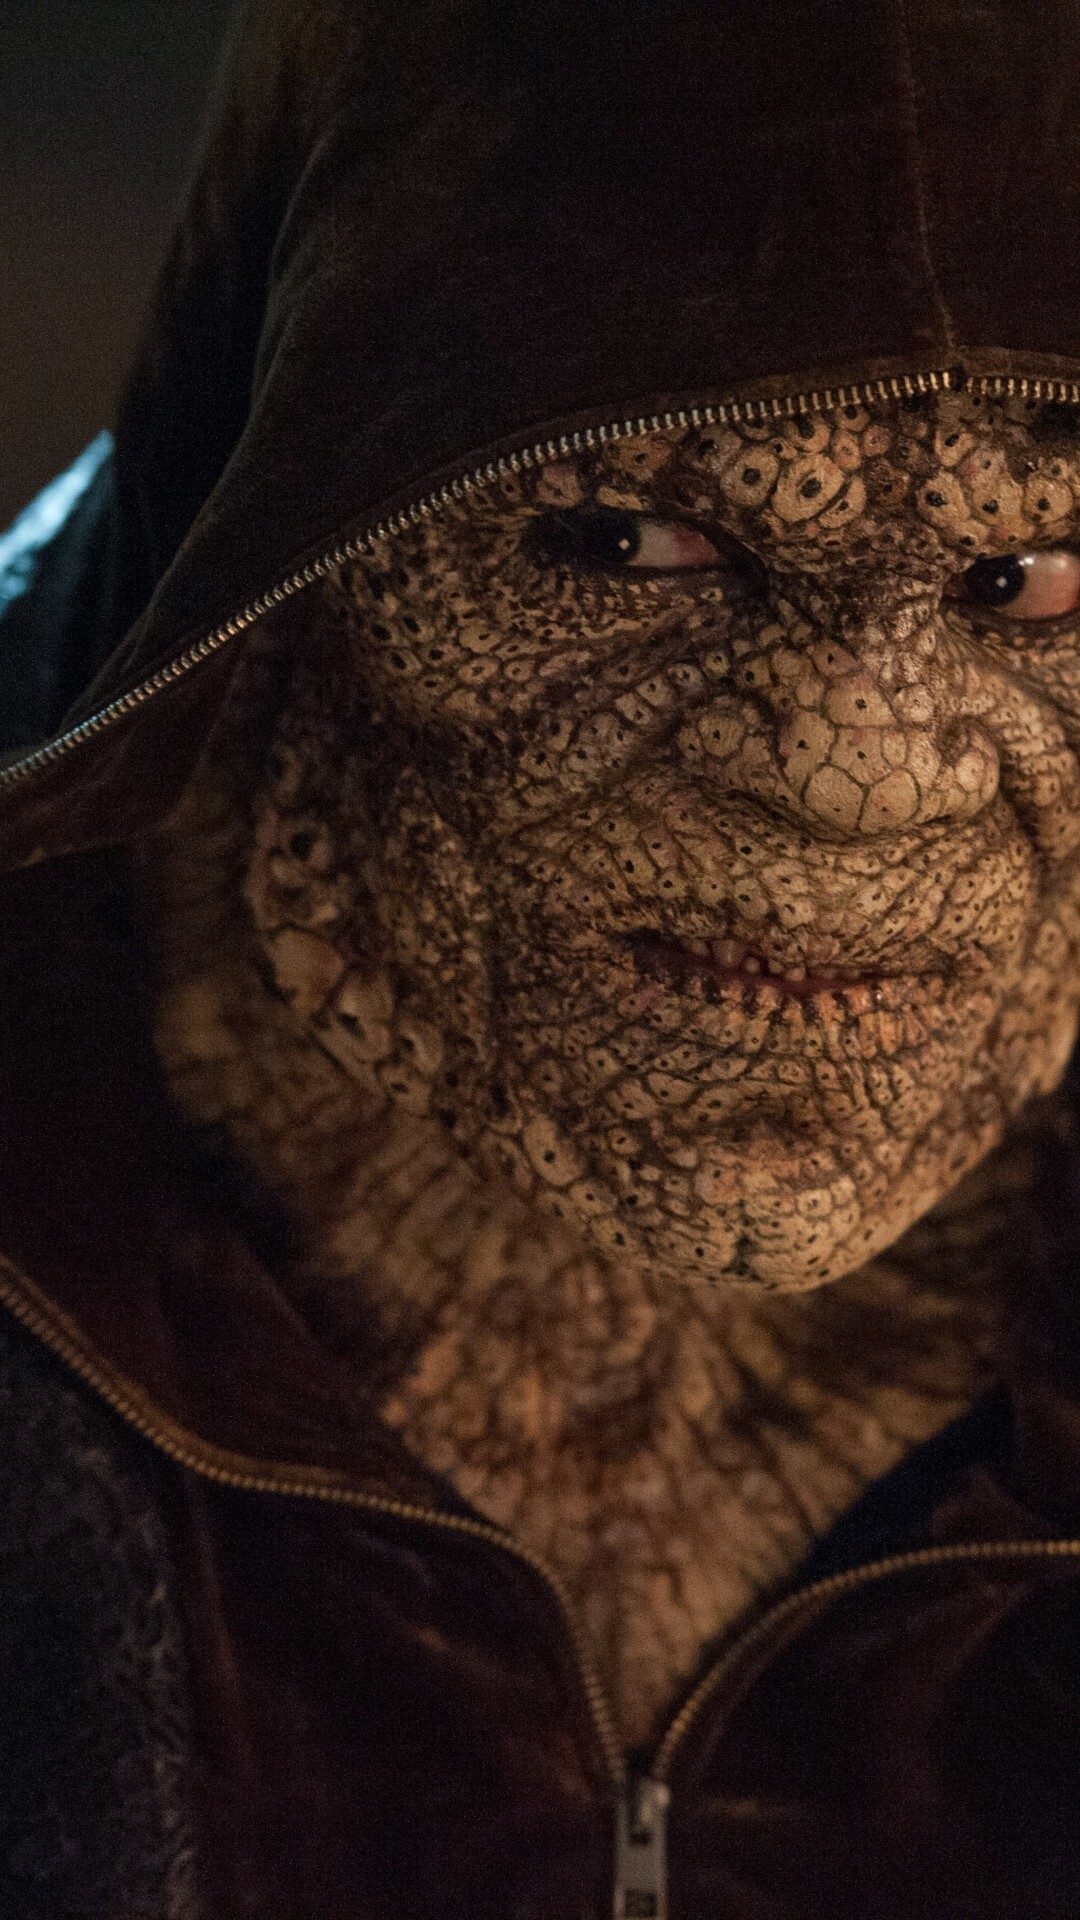 Killer Croc: A member of the Suicide Squad, debuting in the fifth volume of the comic series. 1080x1920 Full HD Wallpaper.